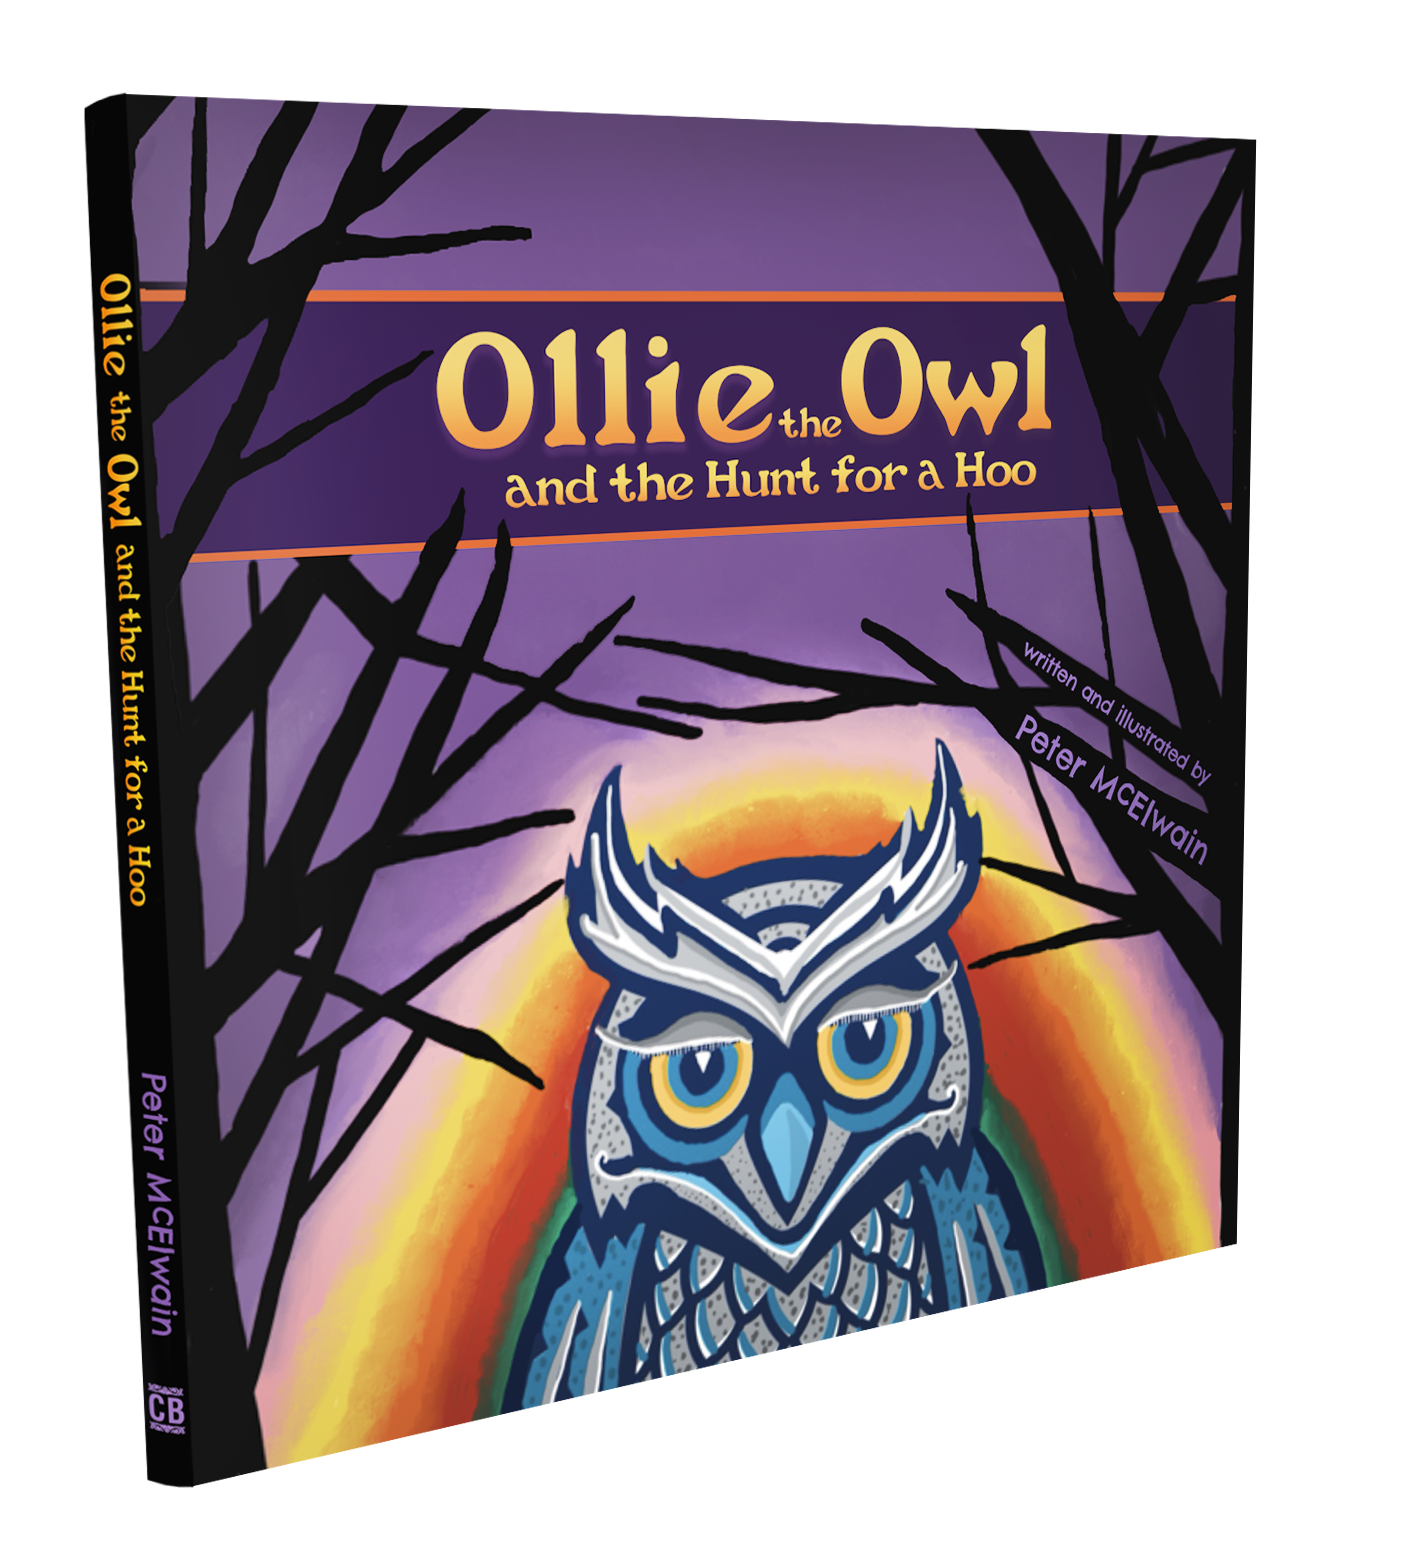 Ollie the Owl and the Hunt for a Hoo